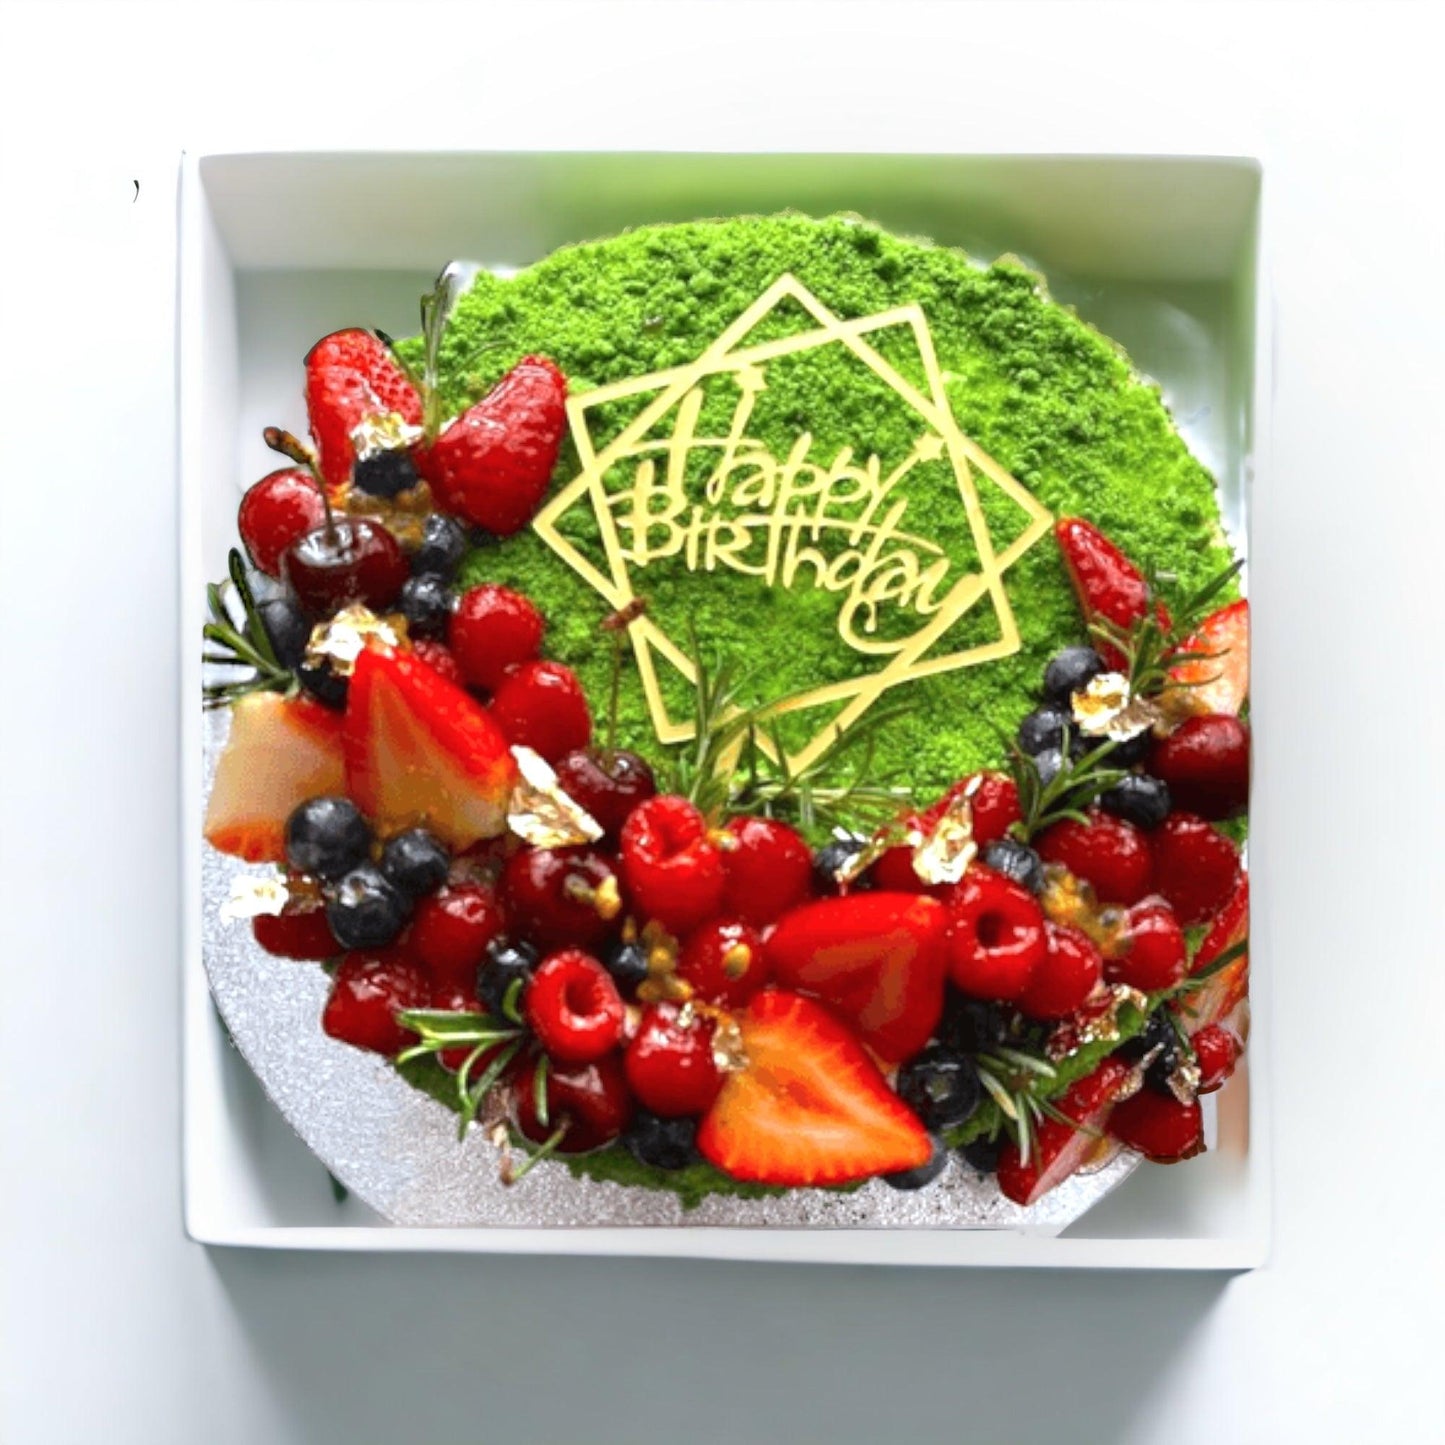 Spinach raspberries -birthday cake - Naturally_deliciousss